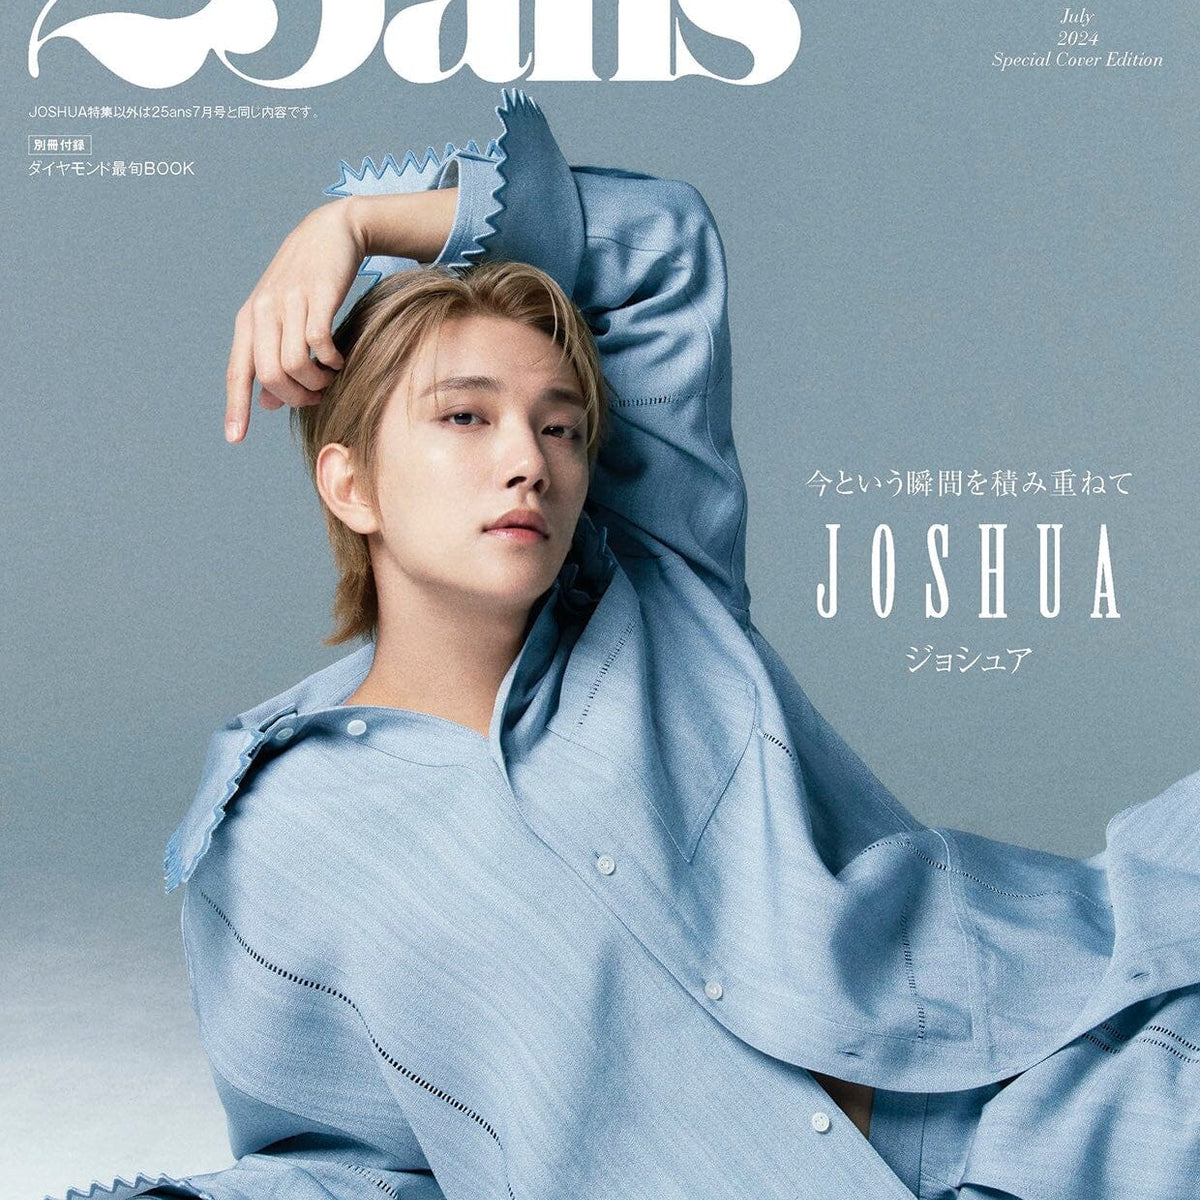 JOSHUA (SEVENTEEN) - 25ANS JAPAN SPECIAL (JULY 2024) - A TYPE